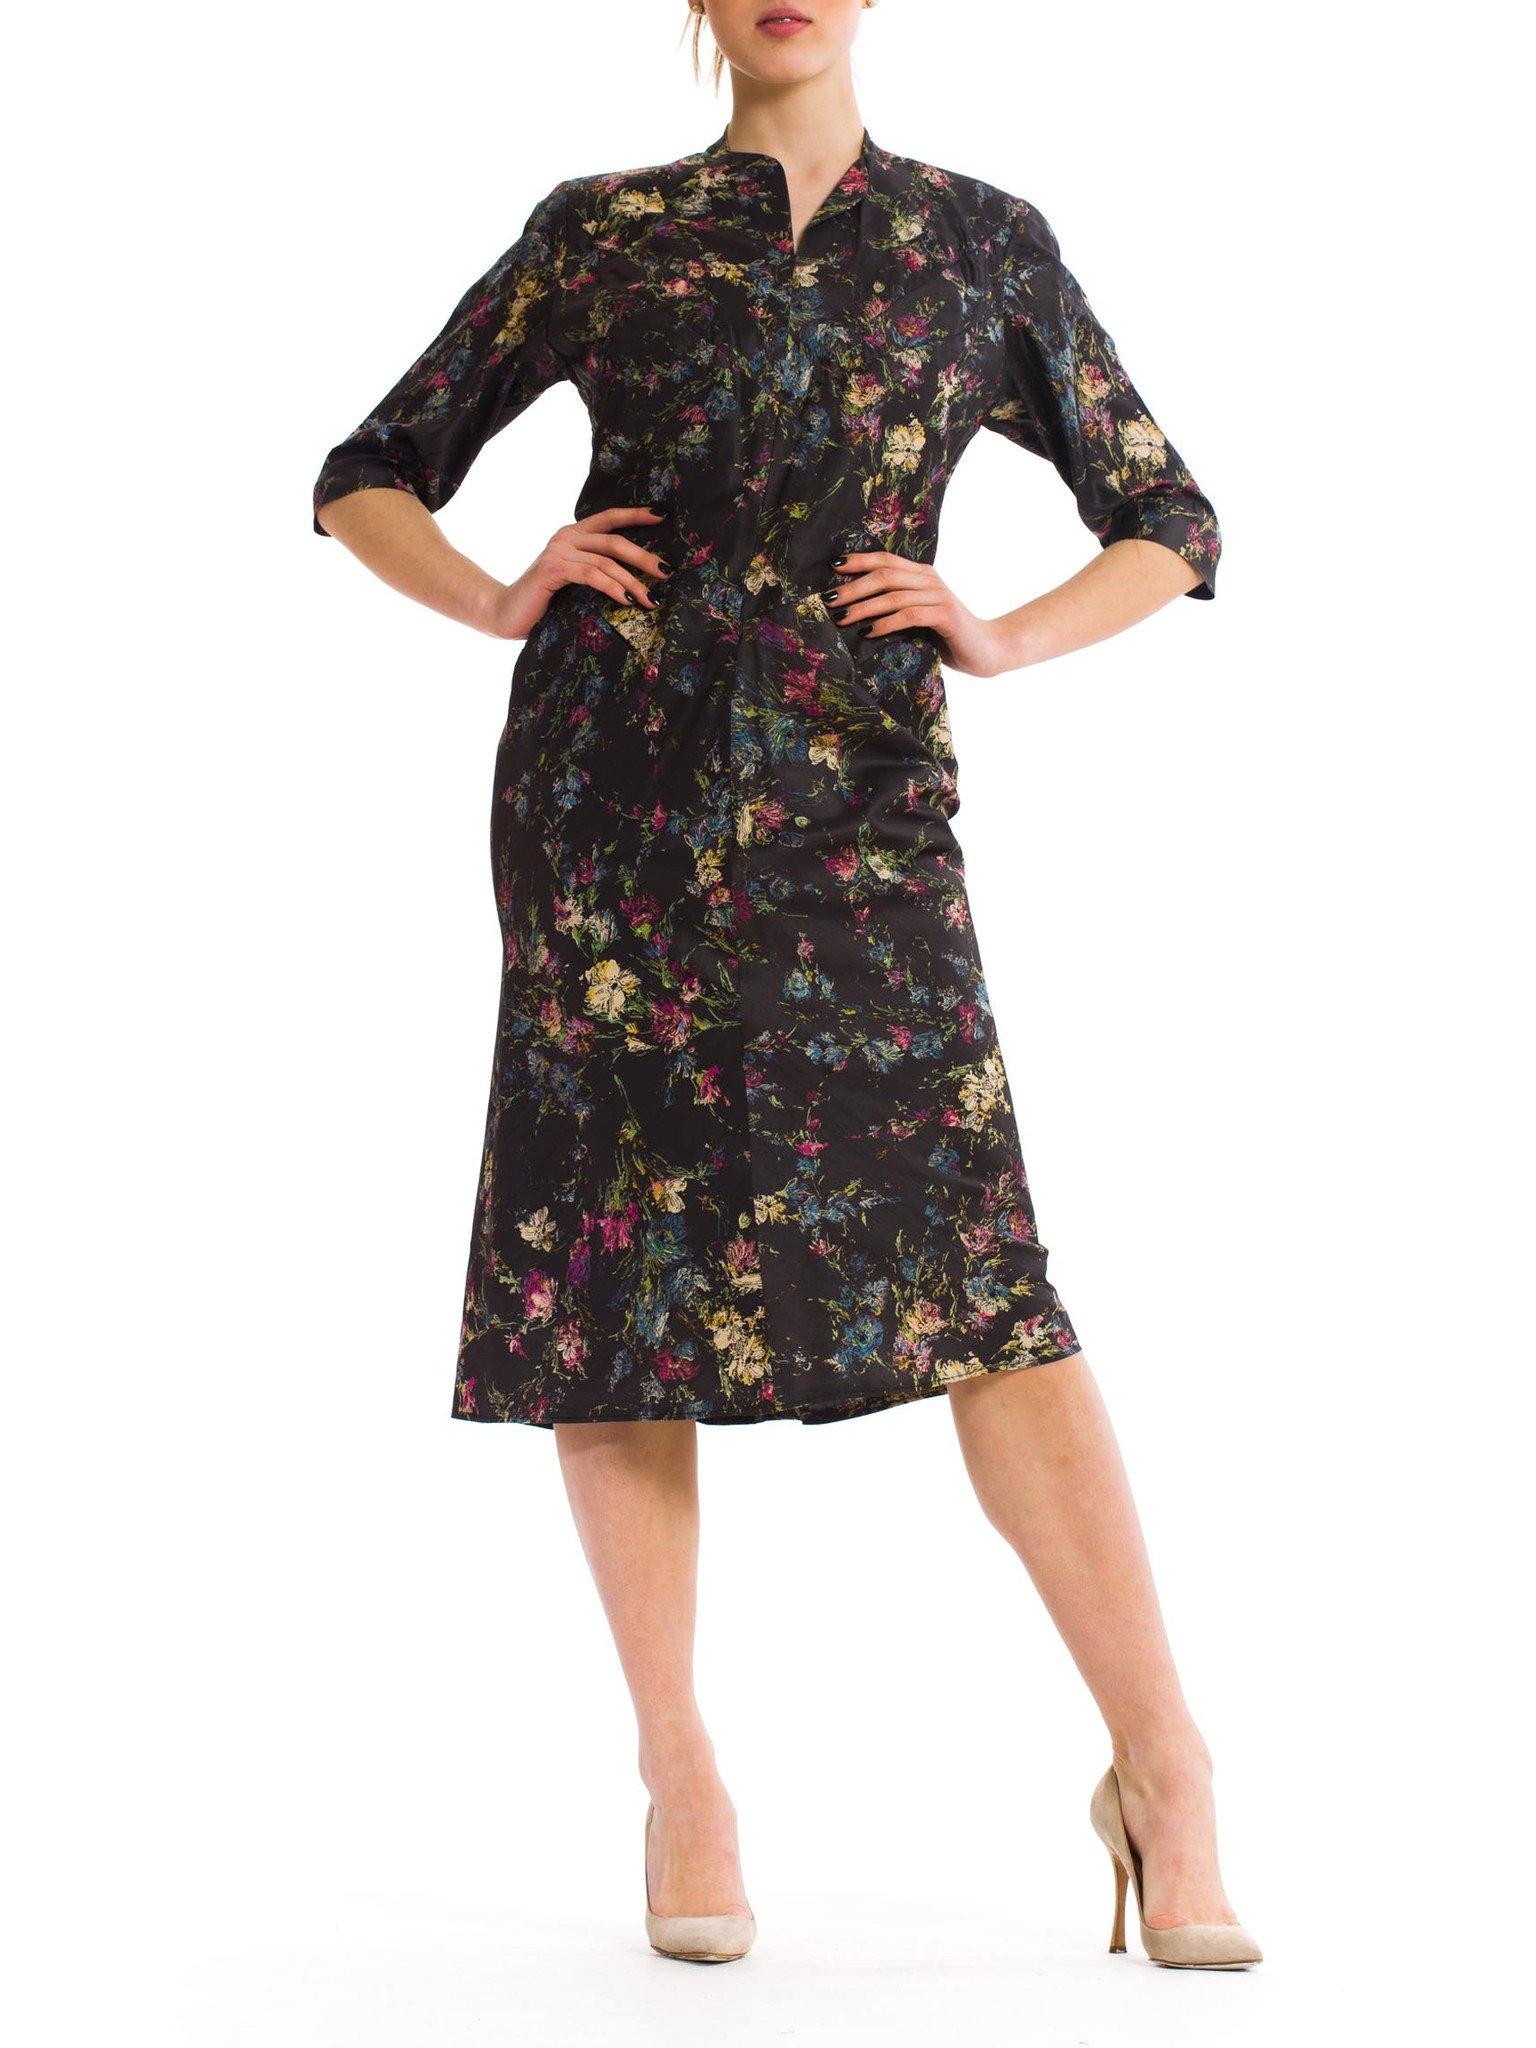 Genius pattern design to this fully lined dress. The skirt is cut on the bias with no side seams. Diagonally cut at the waistline which extends into a belt for cinching the waist in the back, all in one piece! Lined in rayon.  1950S Dark Grey Floral